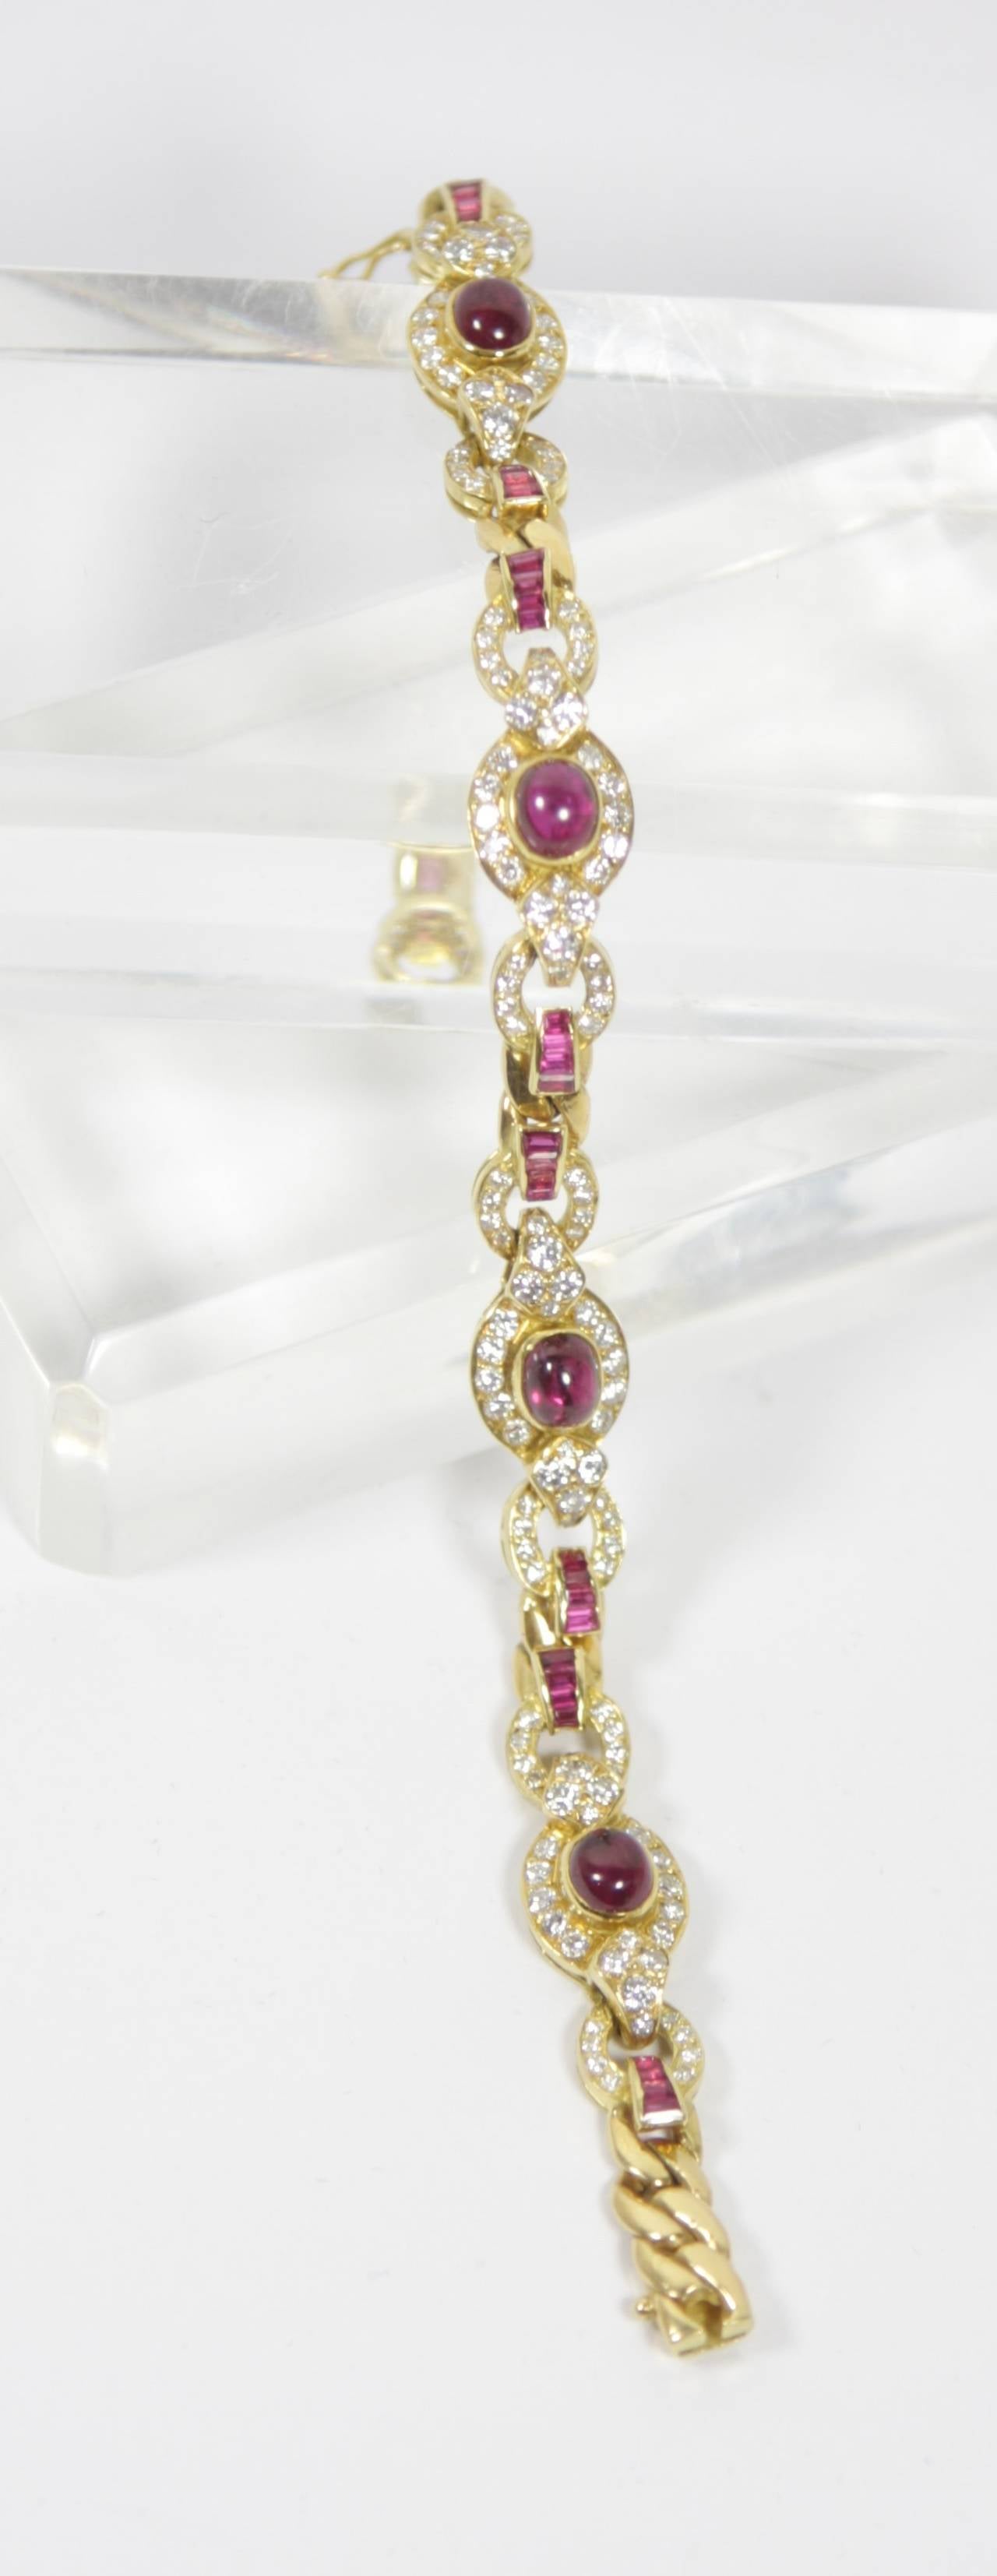 The bracelet is composed of an 18KT yellow gold which features cabachon and calibre cut rubies, along with diamonds. 

Specs:
18 KT Yellow Gold
Diamonds: 144 brilliant cut diamonds with an approximate total weight of 3.35 carats
Rubies: 4